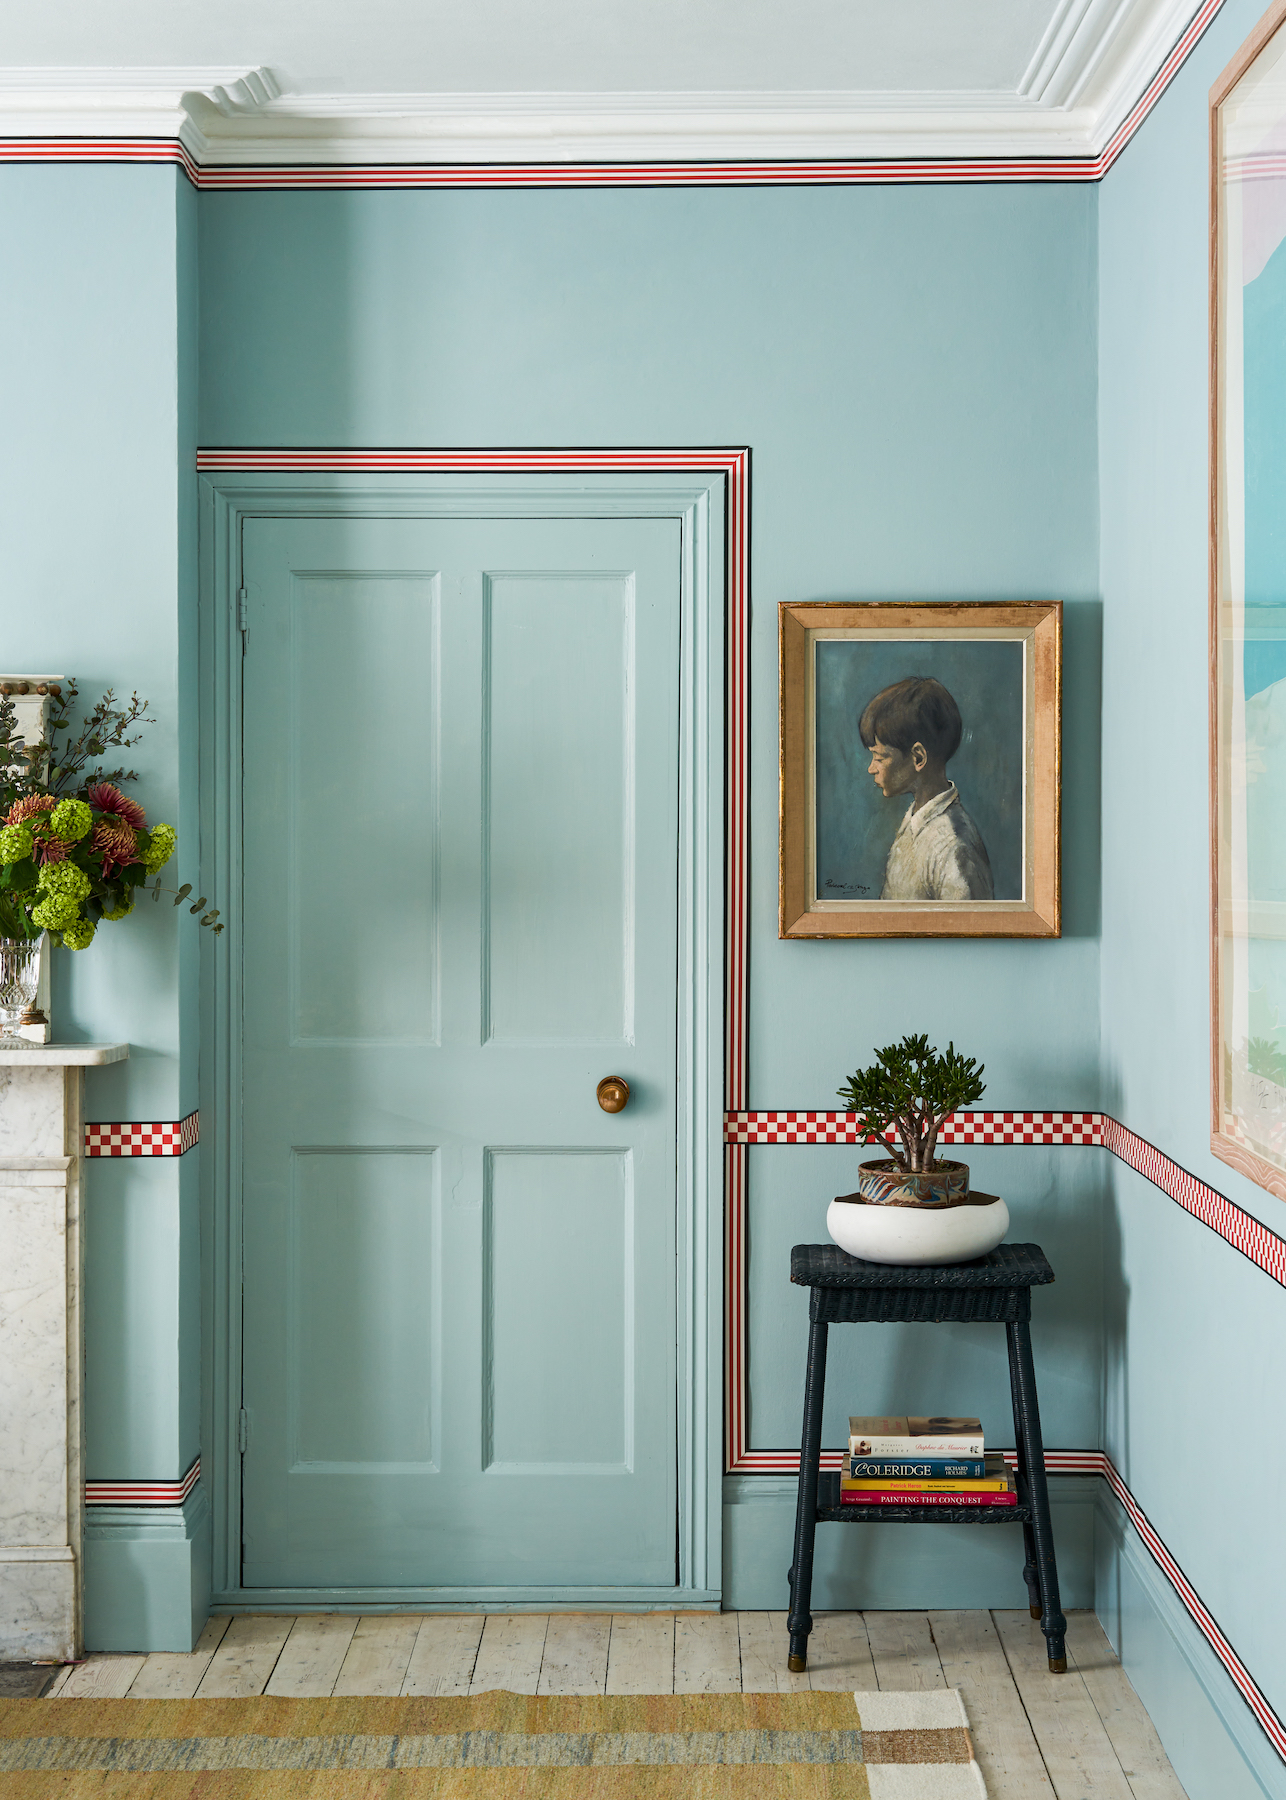 Powder-blue walls are framed in red and navy borders by Studio Atkinson